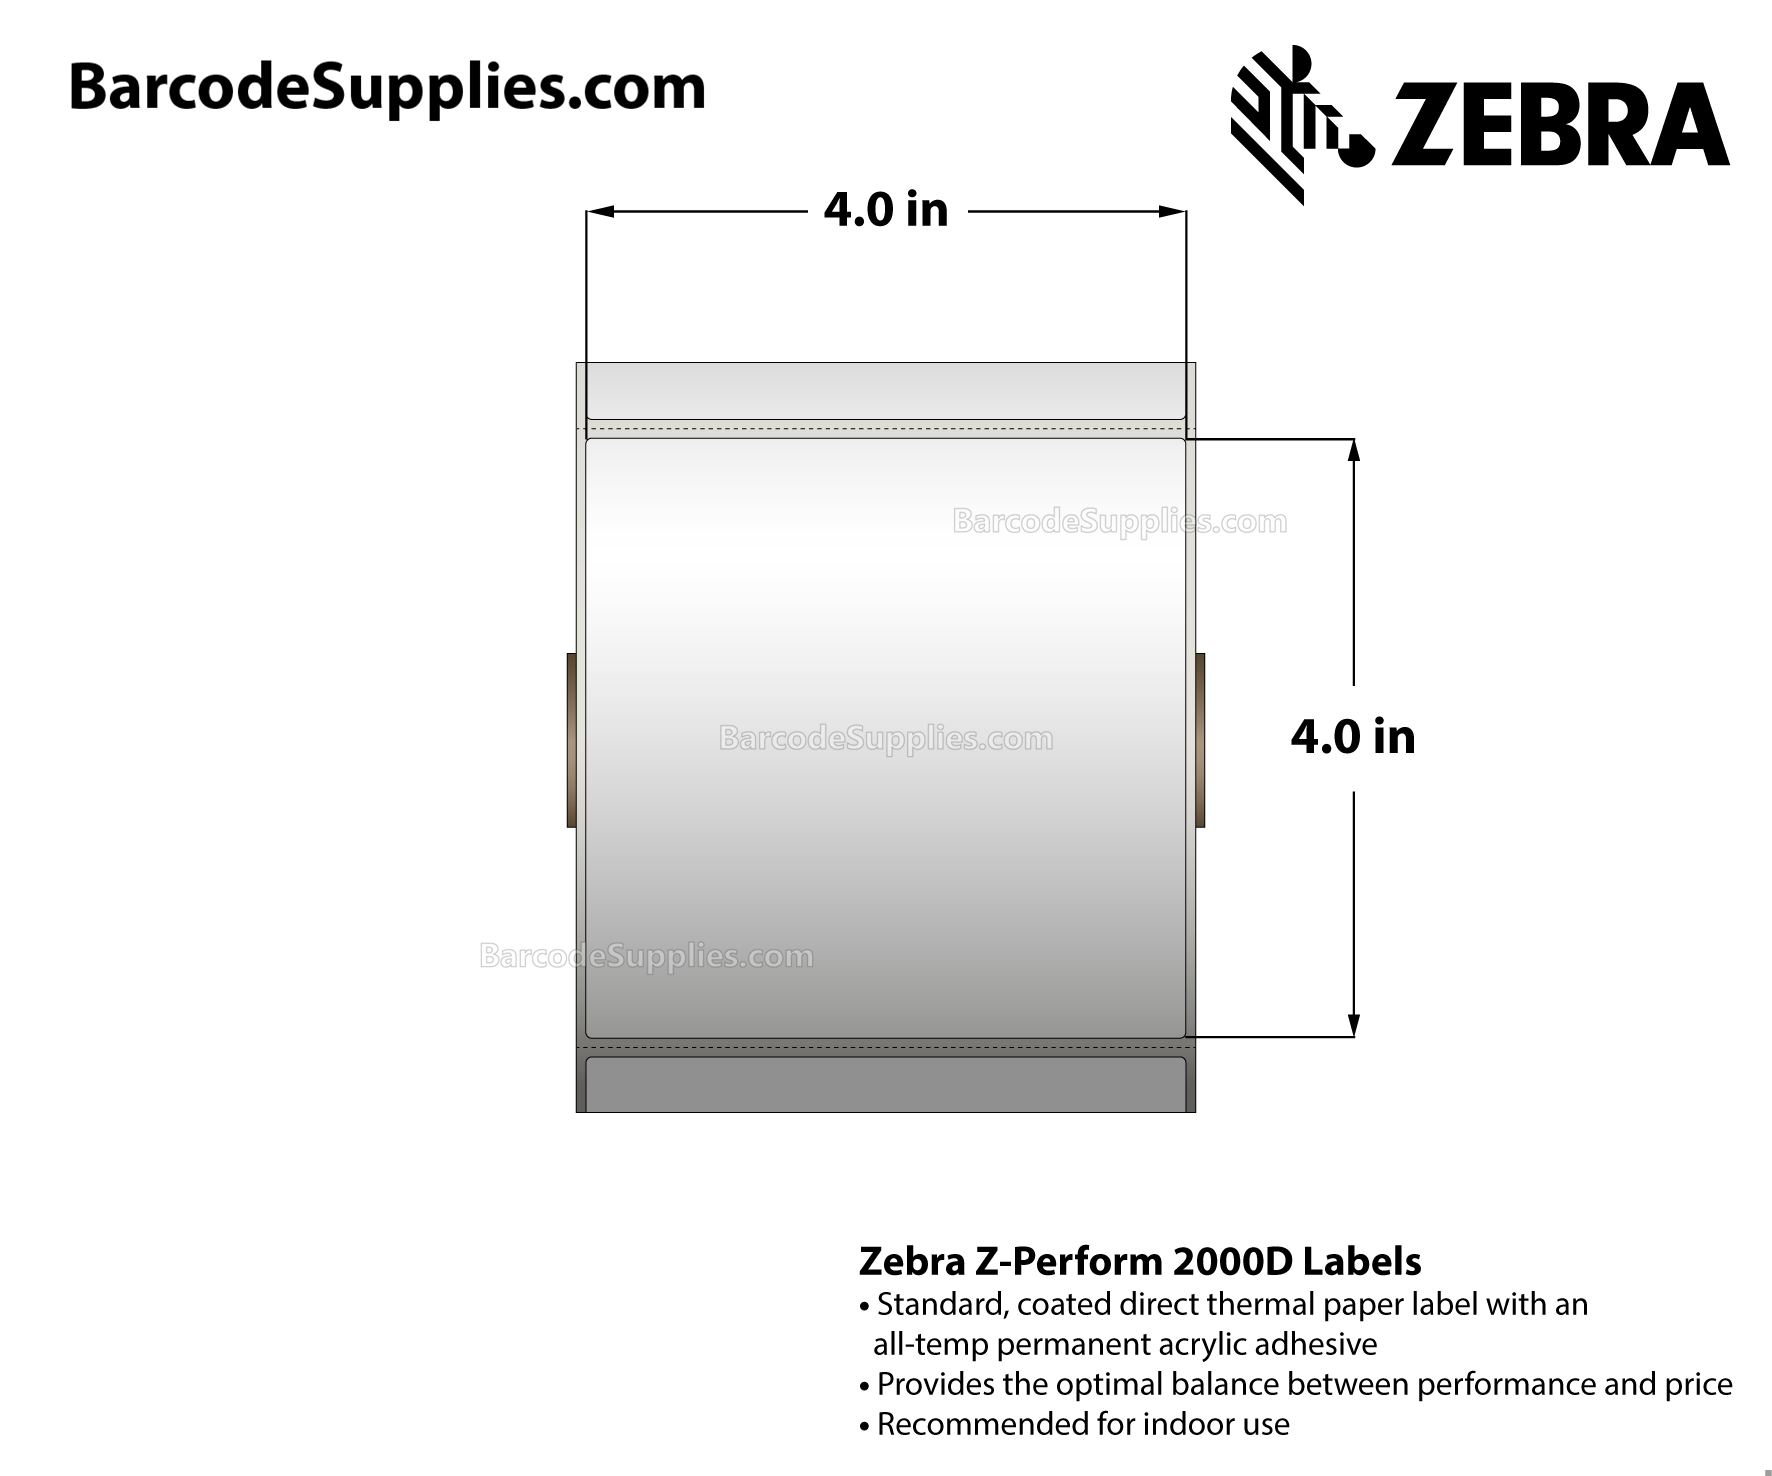 4 x 4 Direct Thermal White Z-Perform 2000D Labels With All-Temp Adhesive - Perforated - 640 Labels Per Roll - Carton Of 6 Rolls - 3840 Labels Total - MPN: 10010033